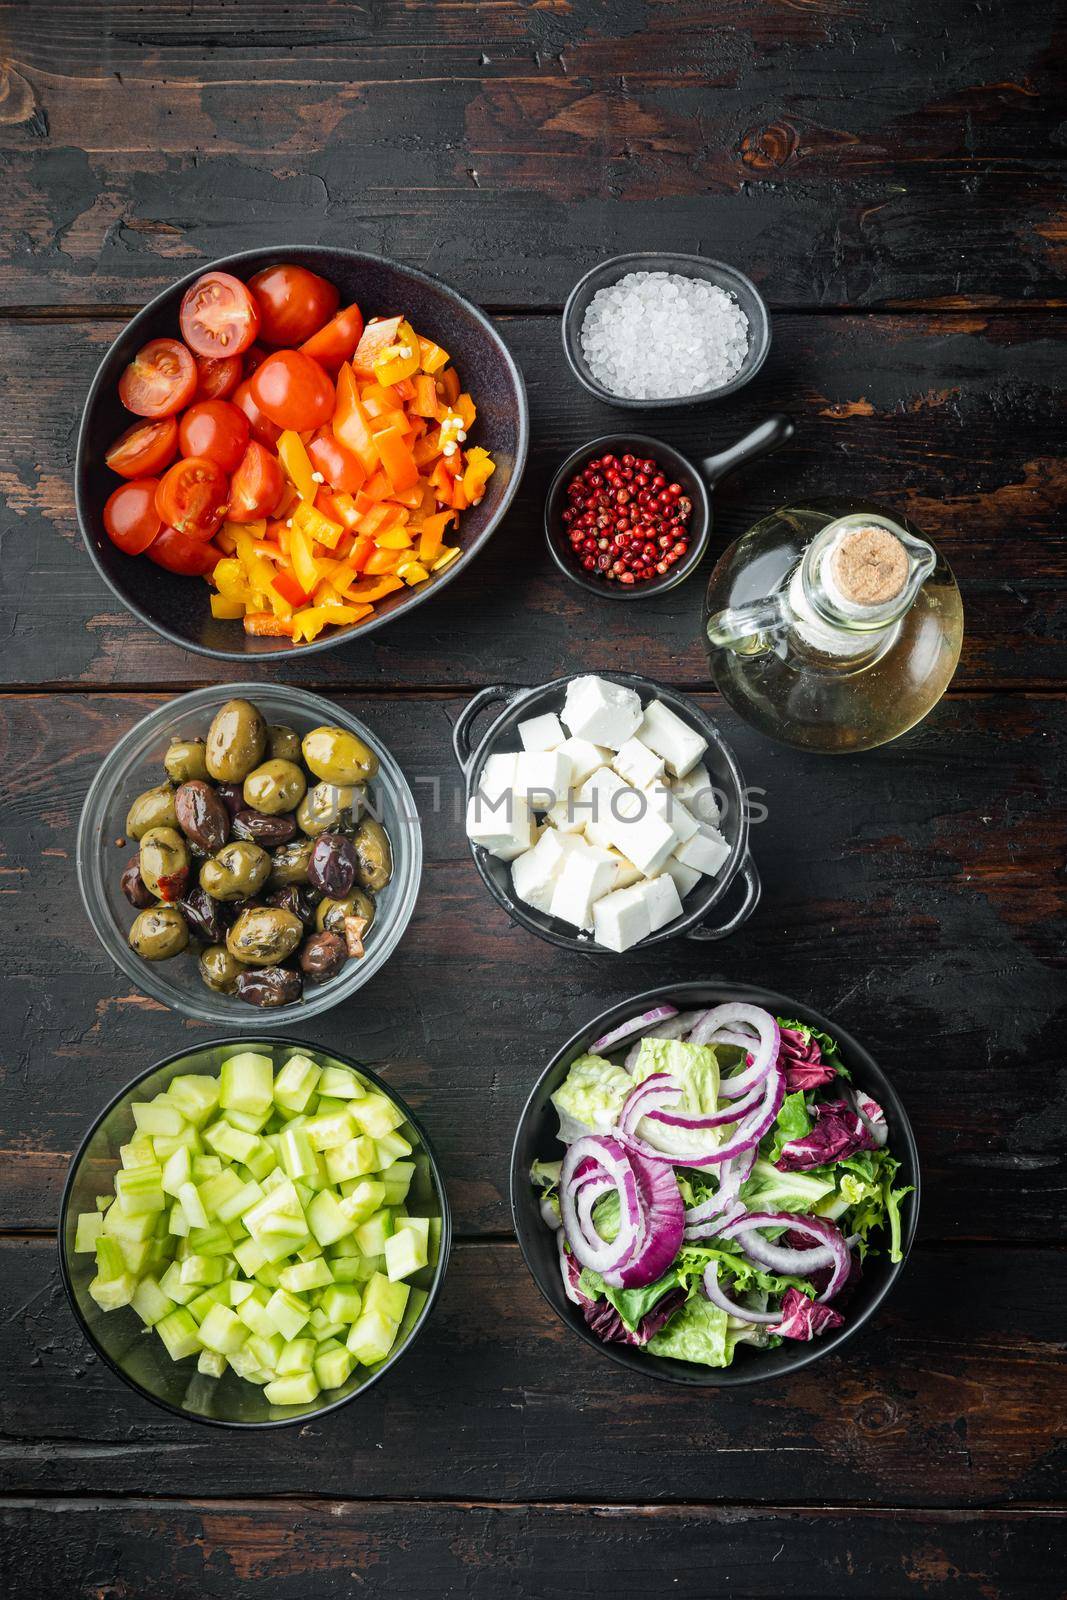 Ingredients for greek salad, on old dark wooden table background, top view flat lay by Ilianesolenyi